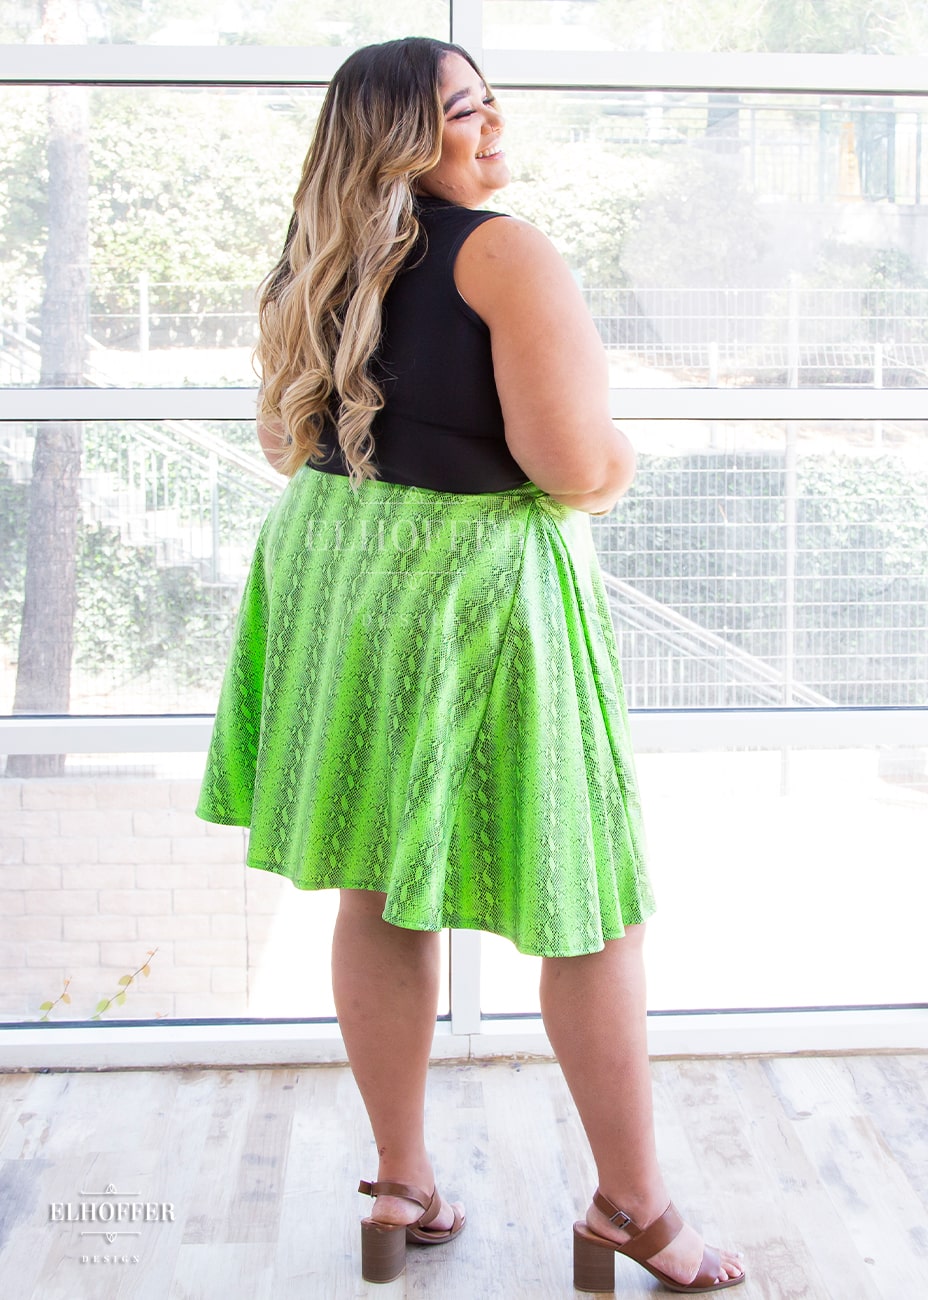 Cori, a medium skinned size 2XL model with brunette and blonde ombre hair, wears a high-waisted knee length full skirt with a fitted matching waistband encased with elastic in the croki green print. The croki green print is a lime green snake print.